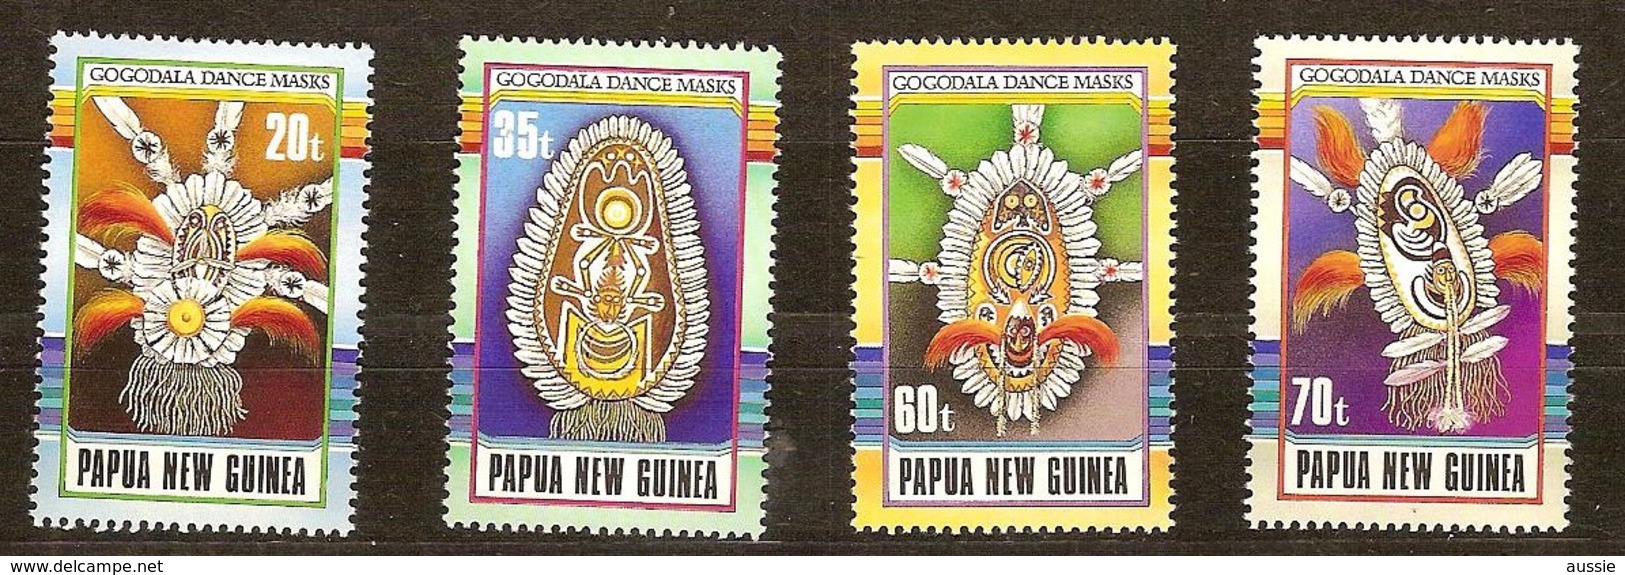 Papouasie Papua New Guinea 1990 Yvert 611-614 *** MNH Cote 7,00 Euro Masques Maskers - Papouasie-Nouvelle-Guinée